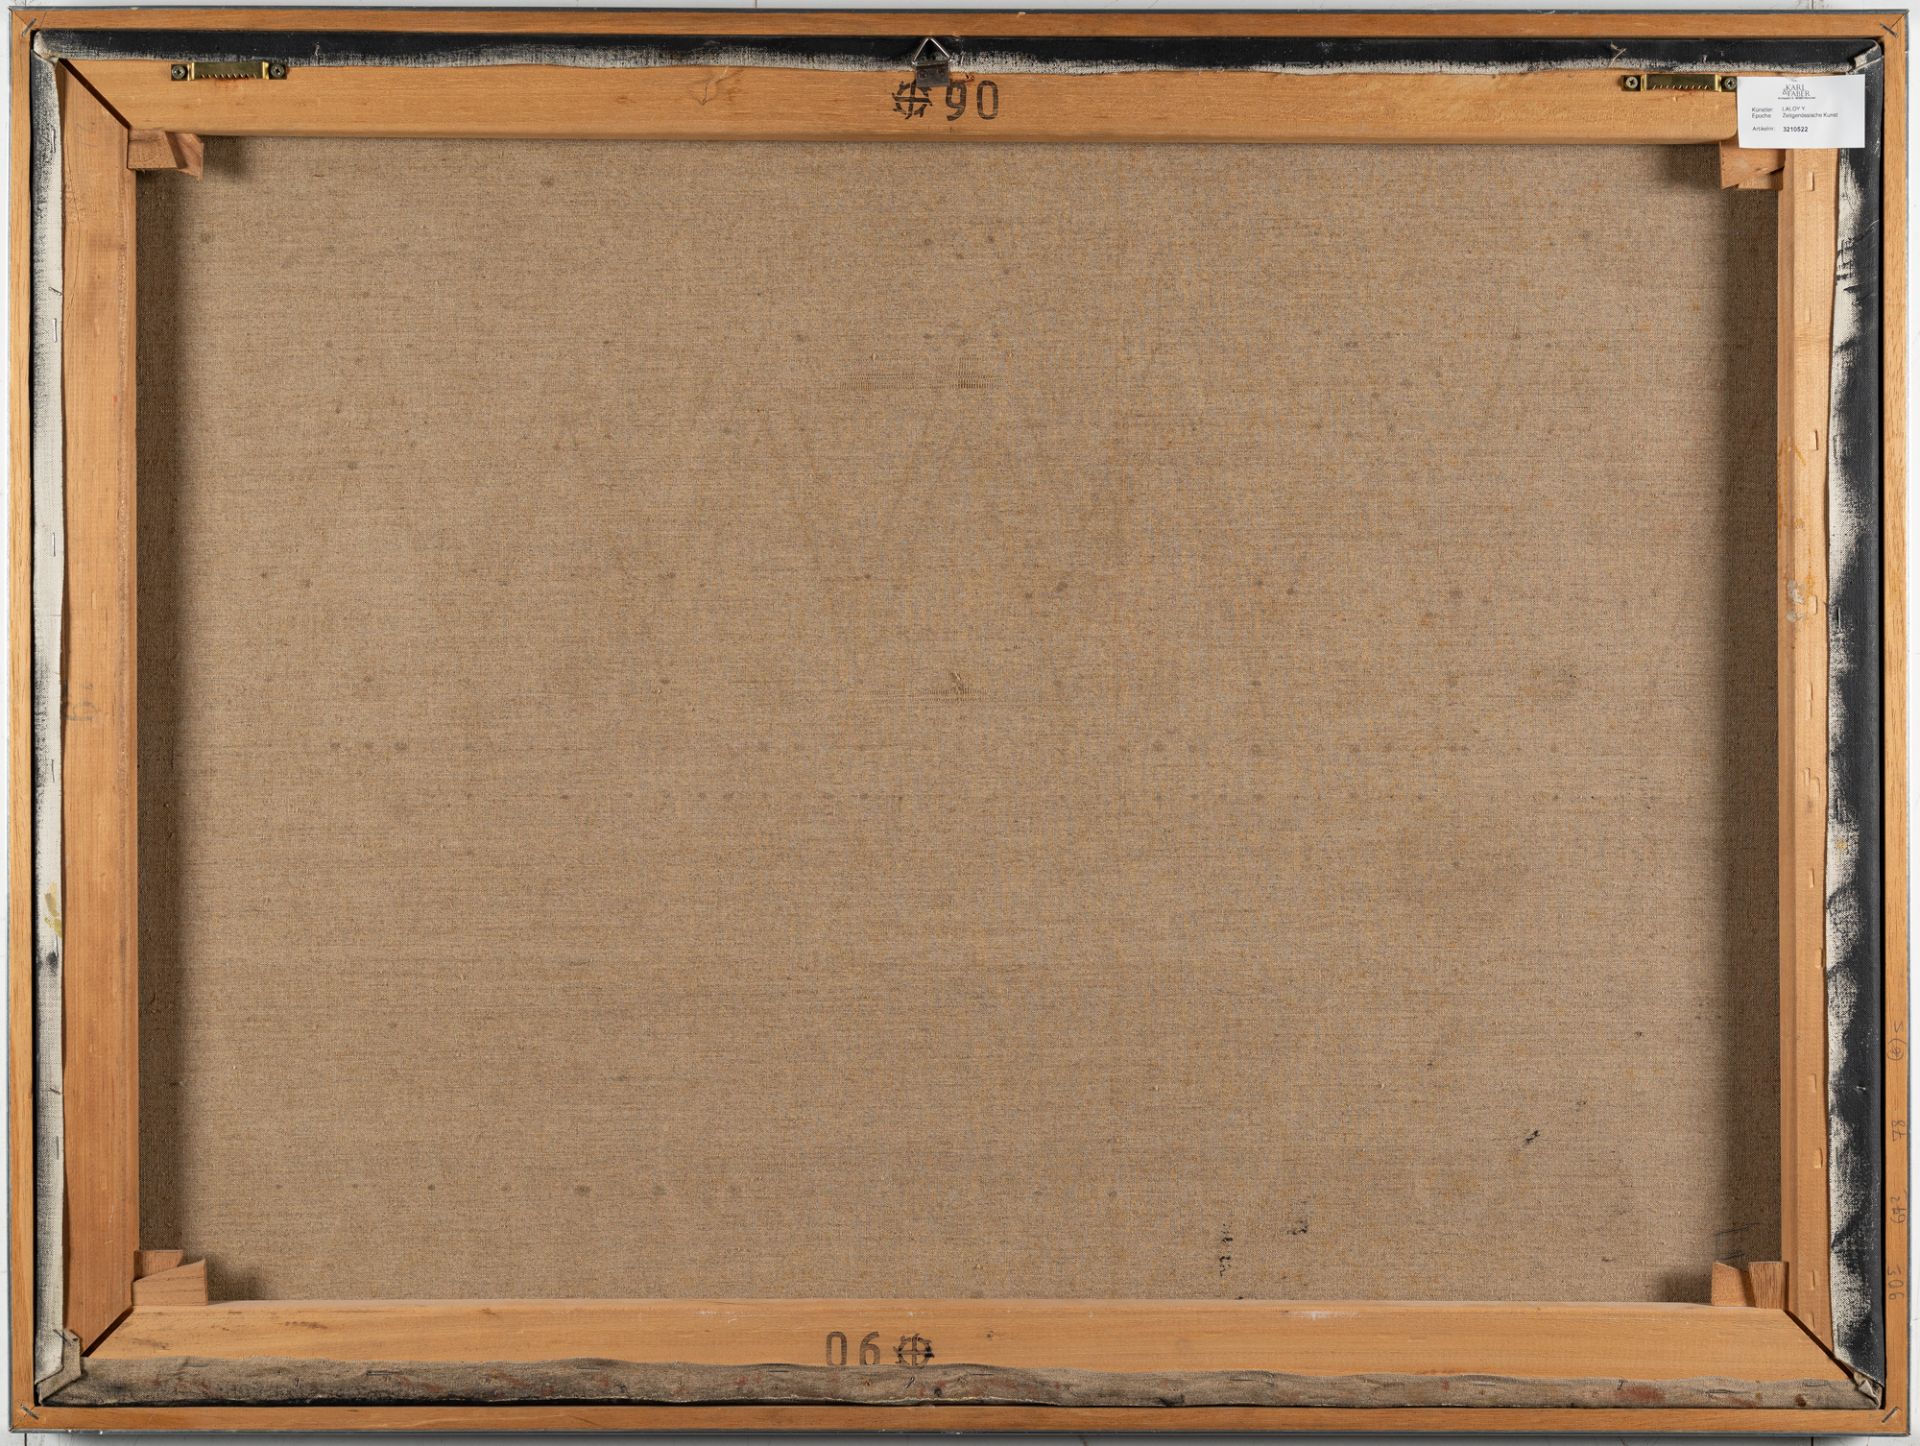 Yves Laloy, Composition.Oil on canvas. (1960). Ca. 67 x 90 cm. Signed lower right (heavily faded). - Image 2 of 3